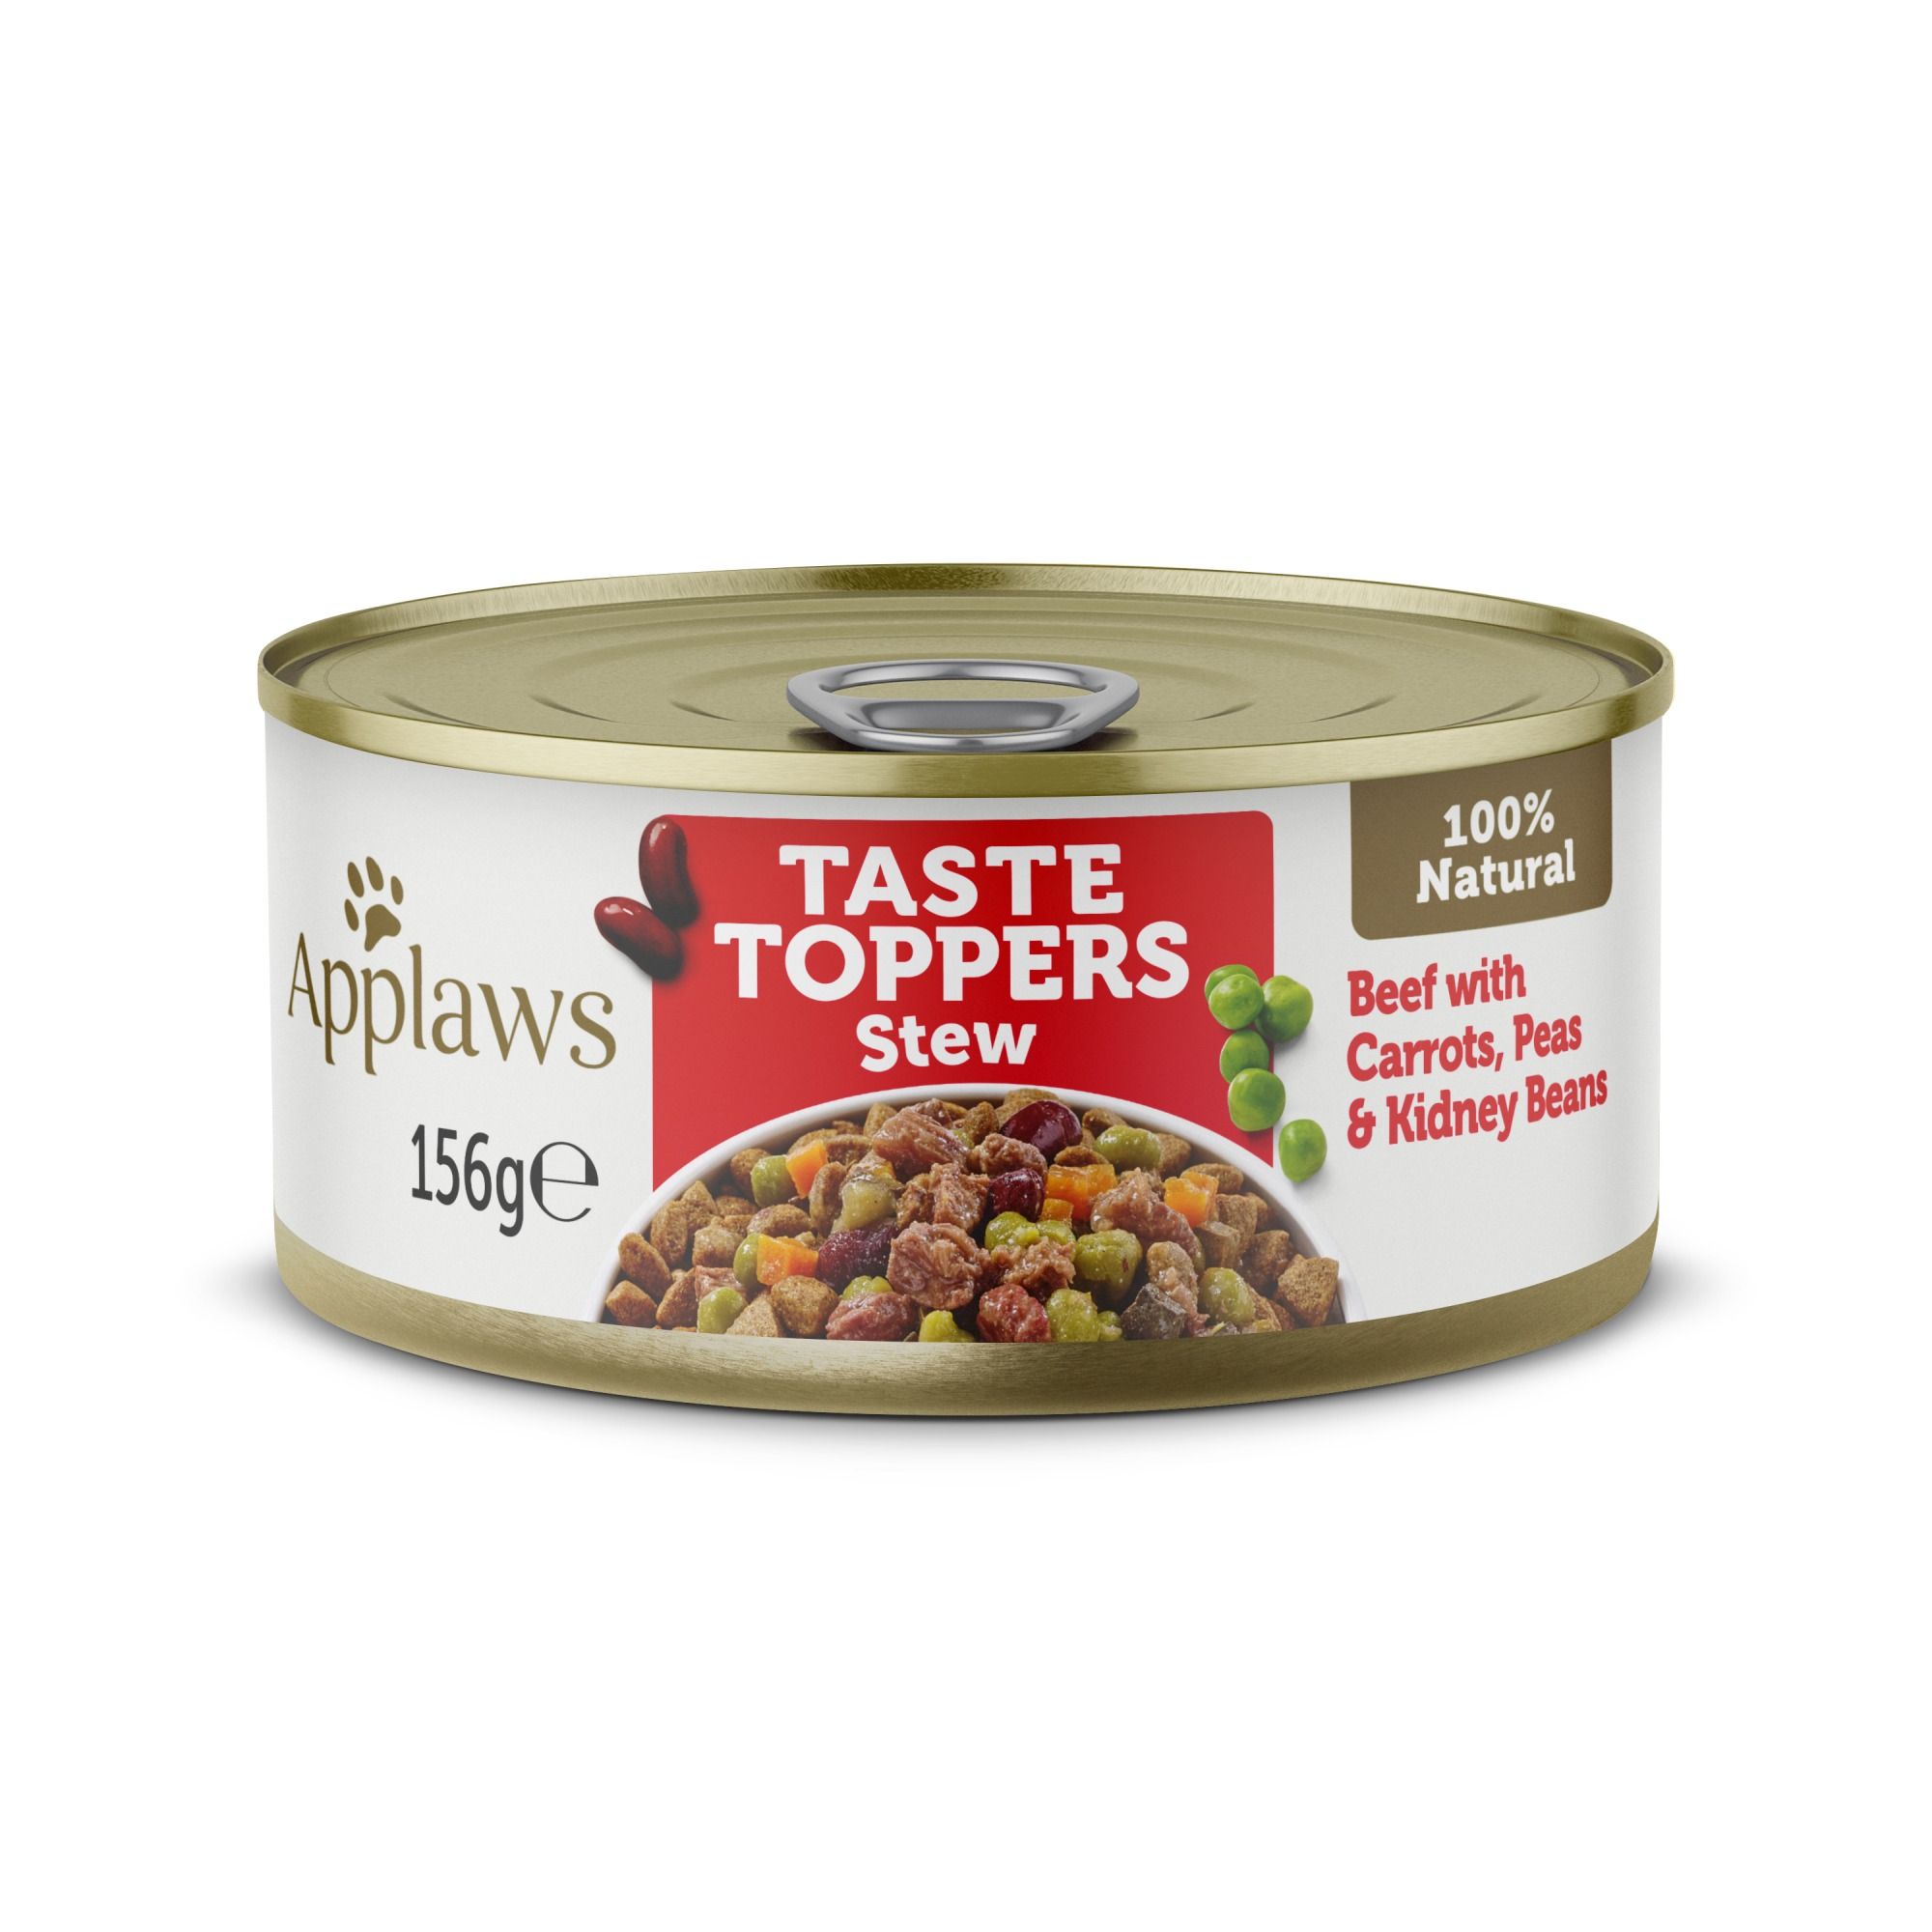 Applaws Taste Toppers Dog Food Tin Beef, Peas and Kidney Beans Stew - 12 x 156g